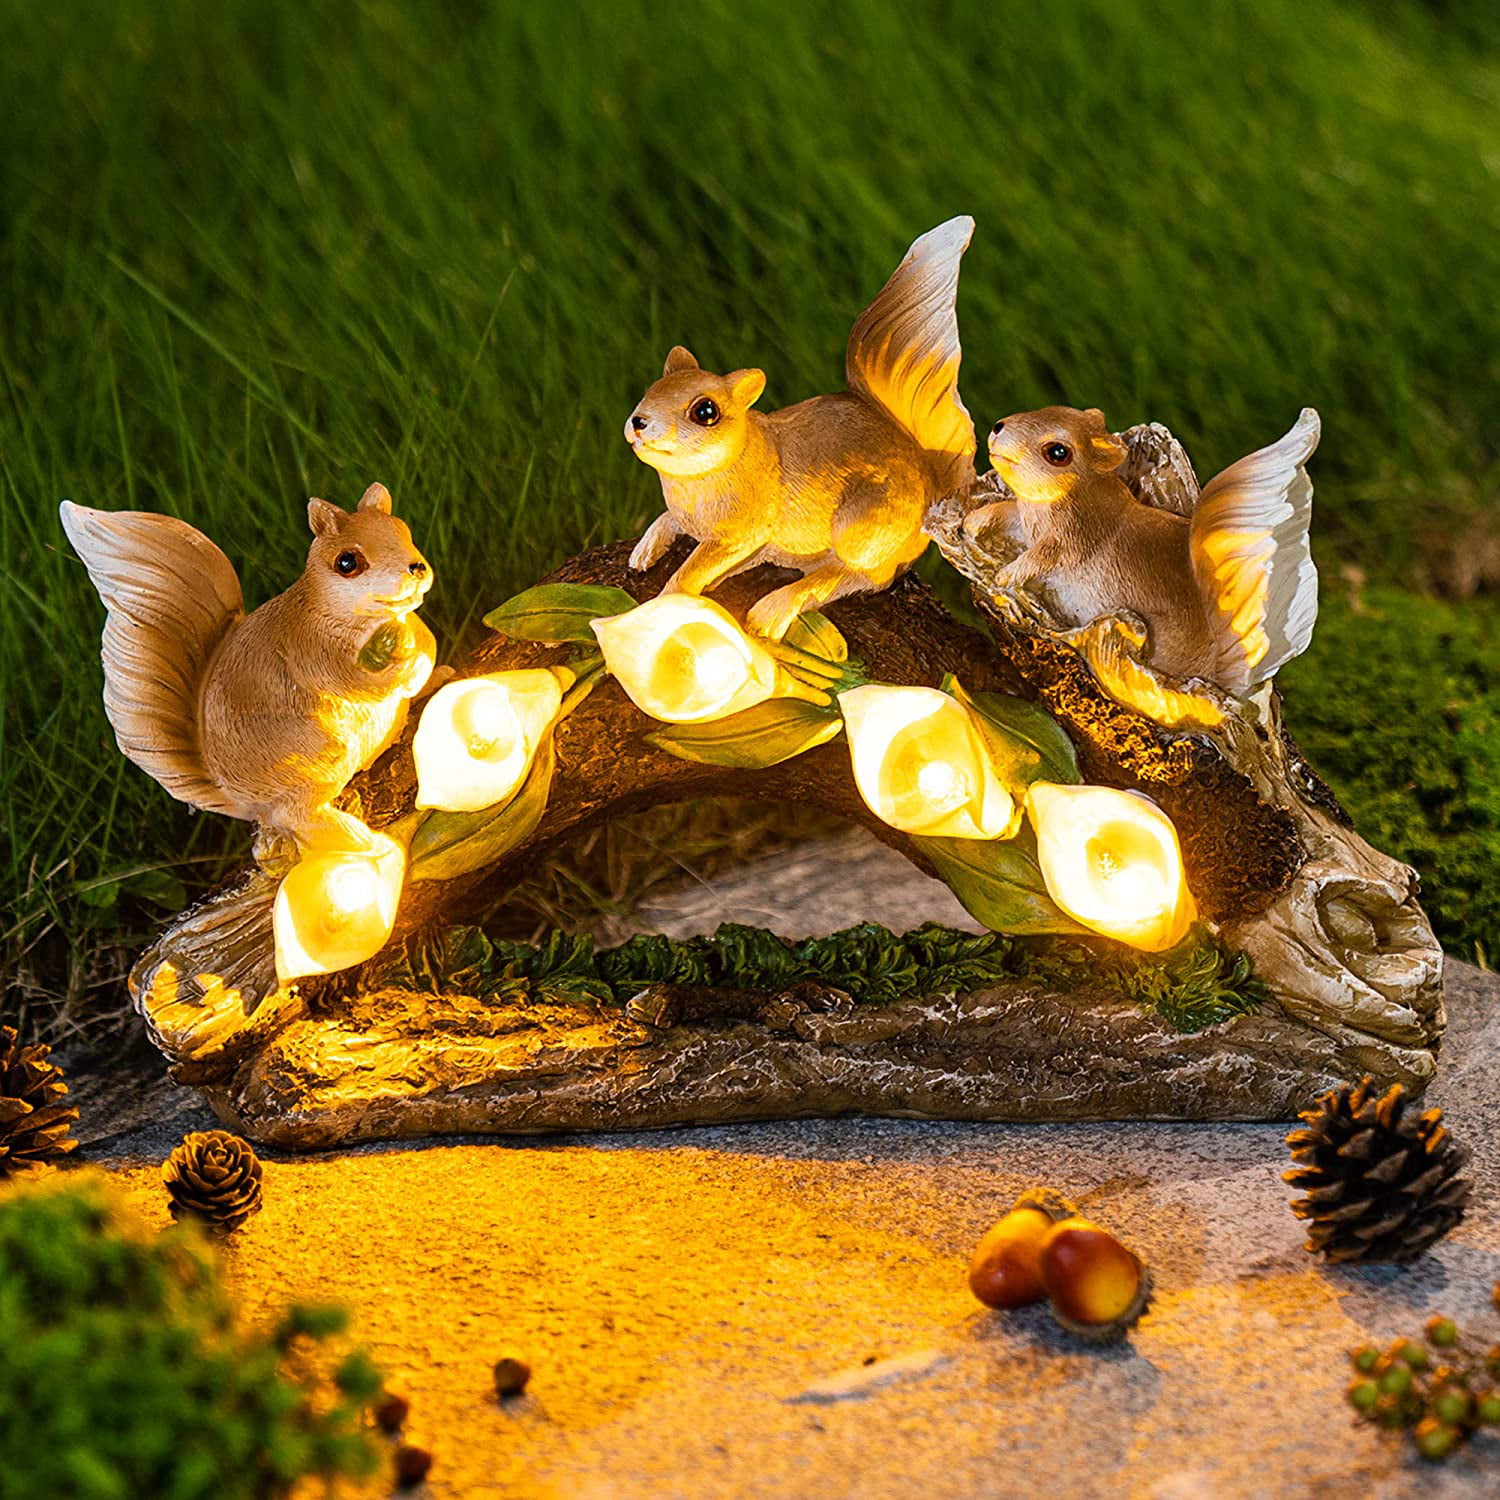 Collectible Art Craft Resin Squirrel Model Figure for Statues Lawn Ornaments 